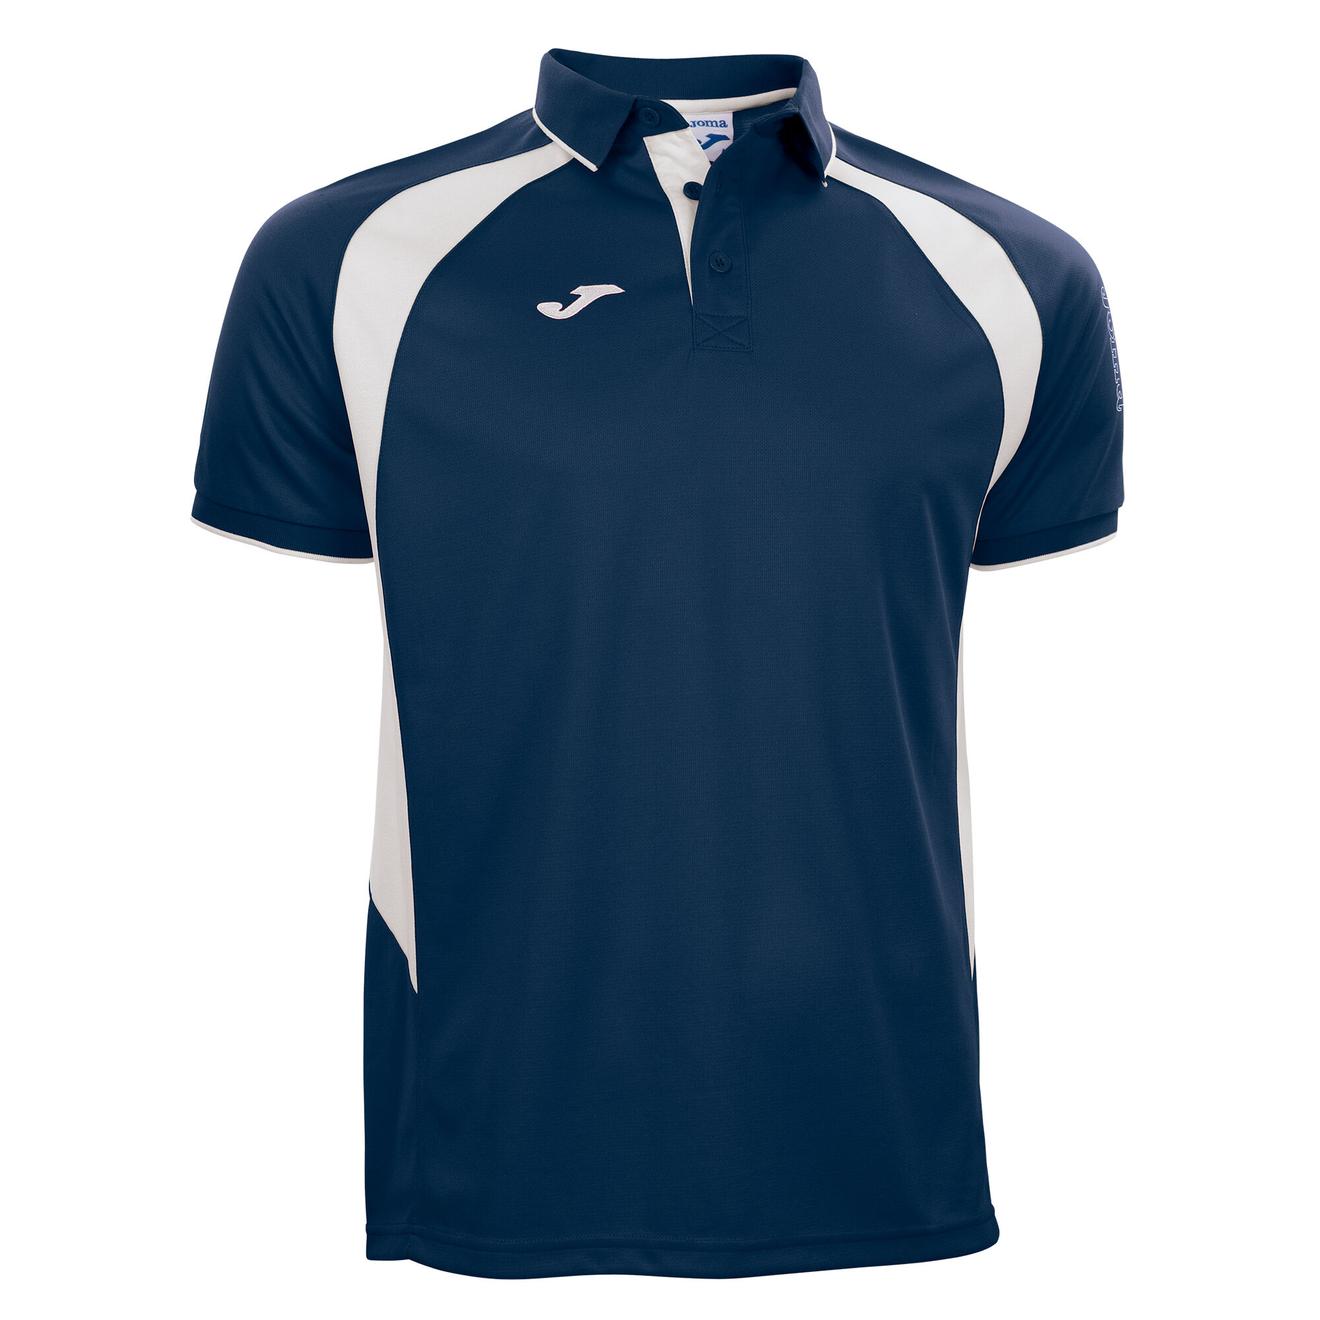 Polo shirt short-sleeve man Championship III navy blue white offers at £10.5 in Joma